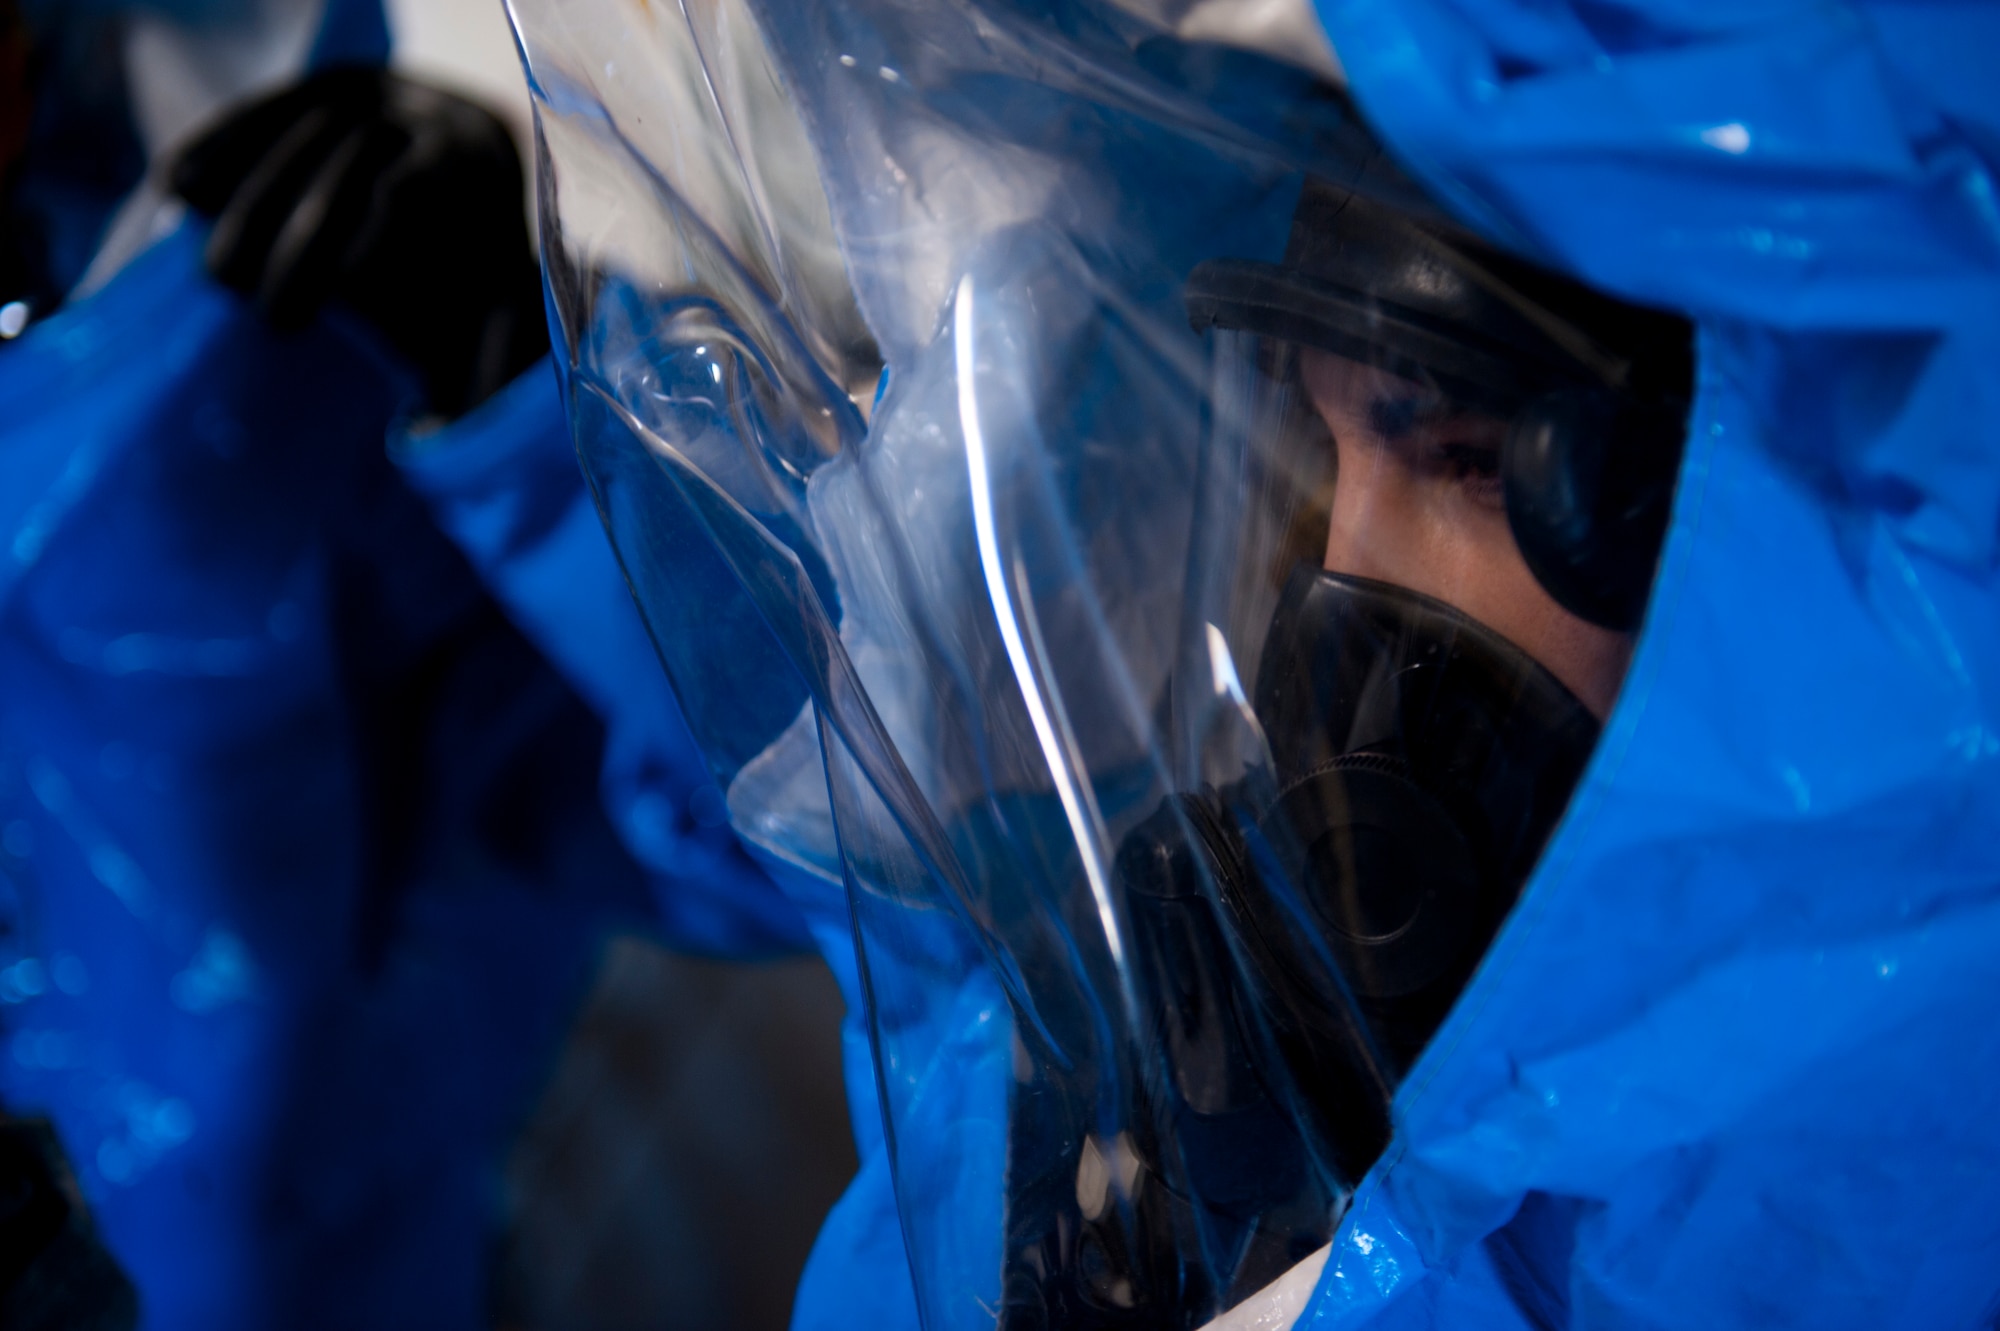 Airman 1st Class Lucas Montoya, 49th Civil Engineer Squadron bioenvironmental engineer, dons a hazmat suit to prepare for integrated base emergency response capability training at Holloman Air Force Base, N.M., April 18. Airmen working for bioenvironmental engineering and emergency management ran through a training scenario where they had to identify the source of a simulated chemical spill and contain it. (U.S. Air Force photo by Airman 1st Class Daniel E. Liddicoet/Released)